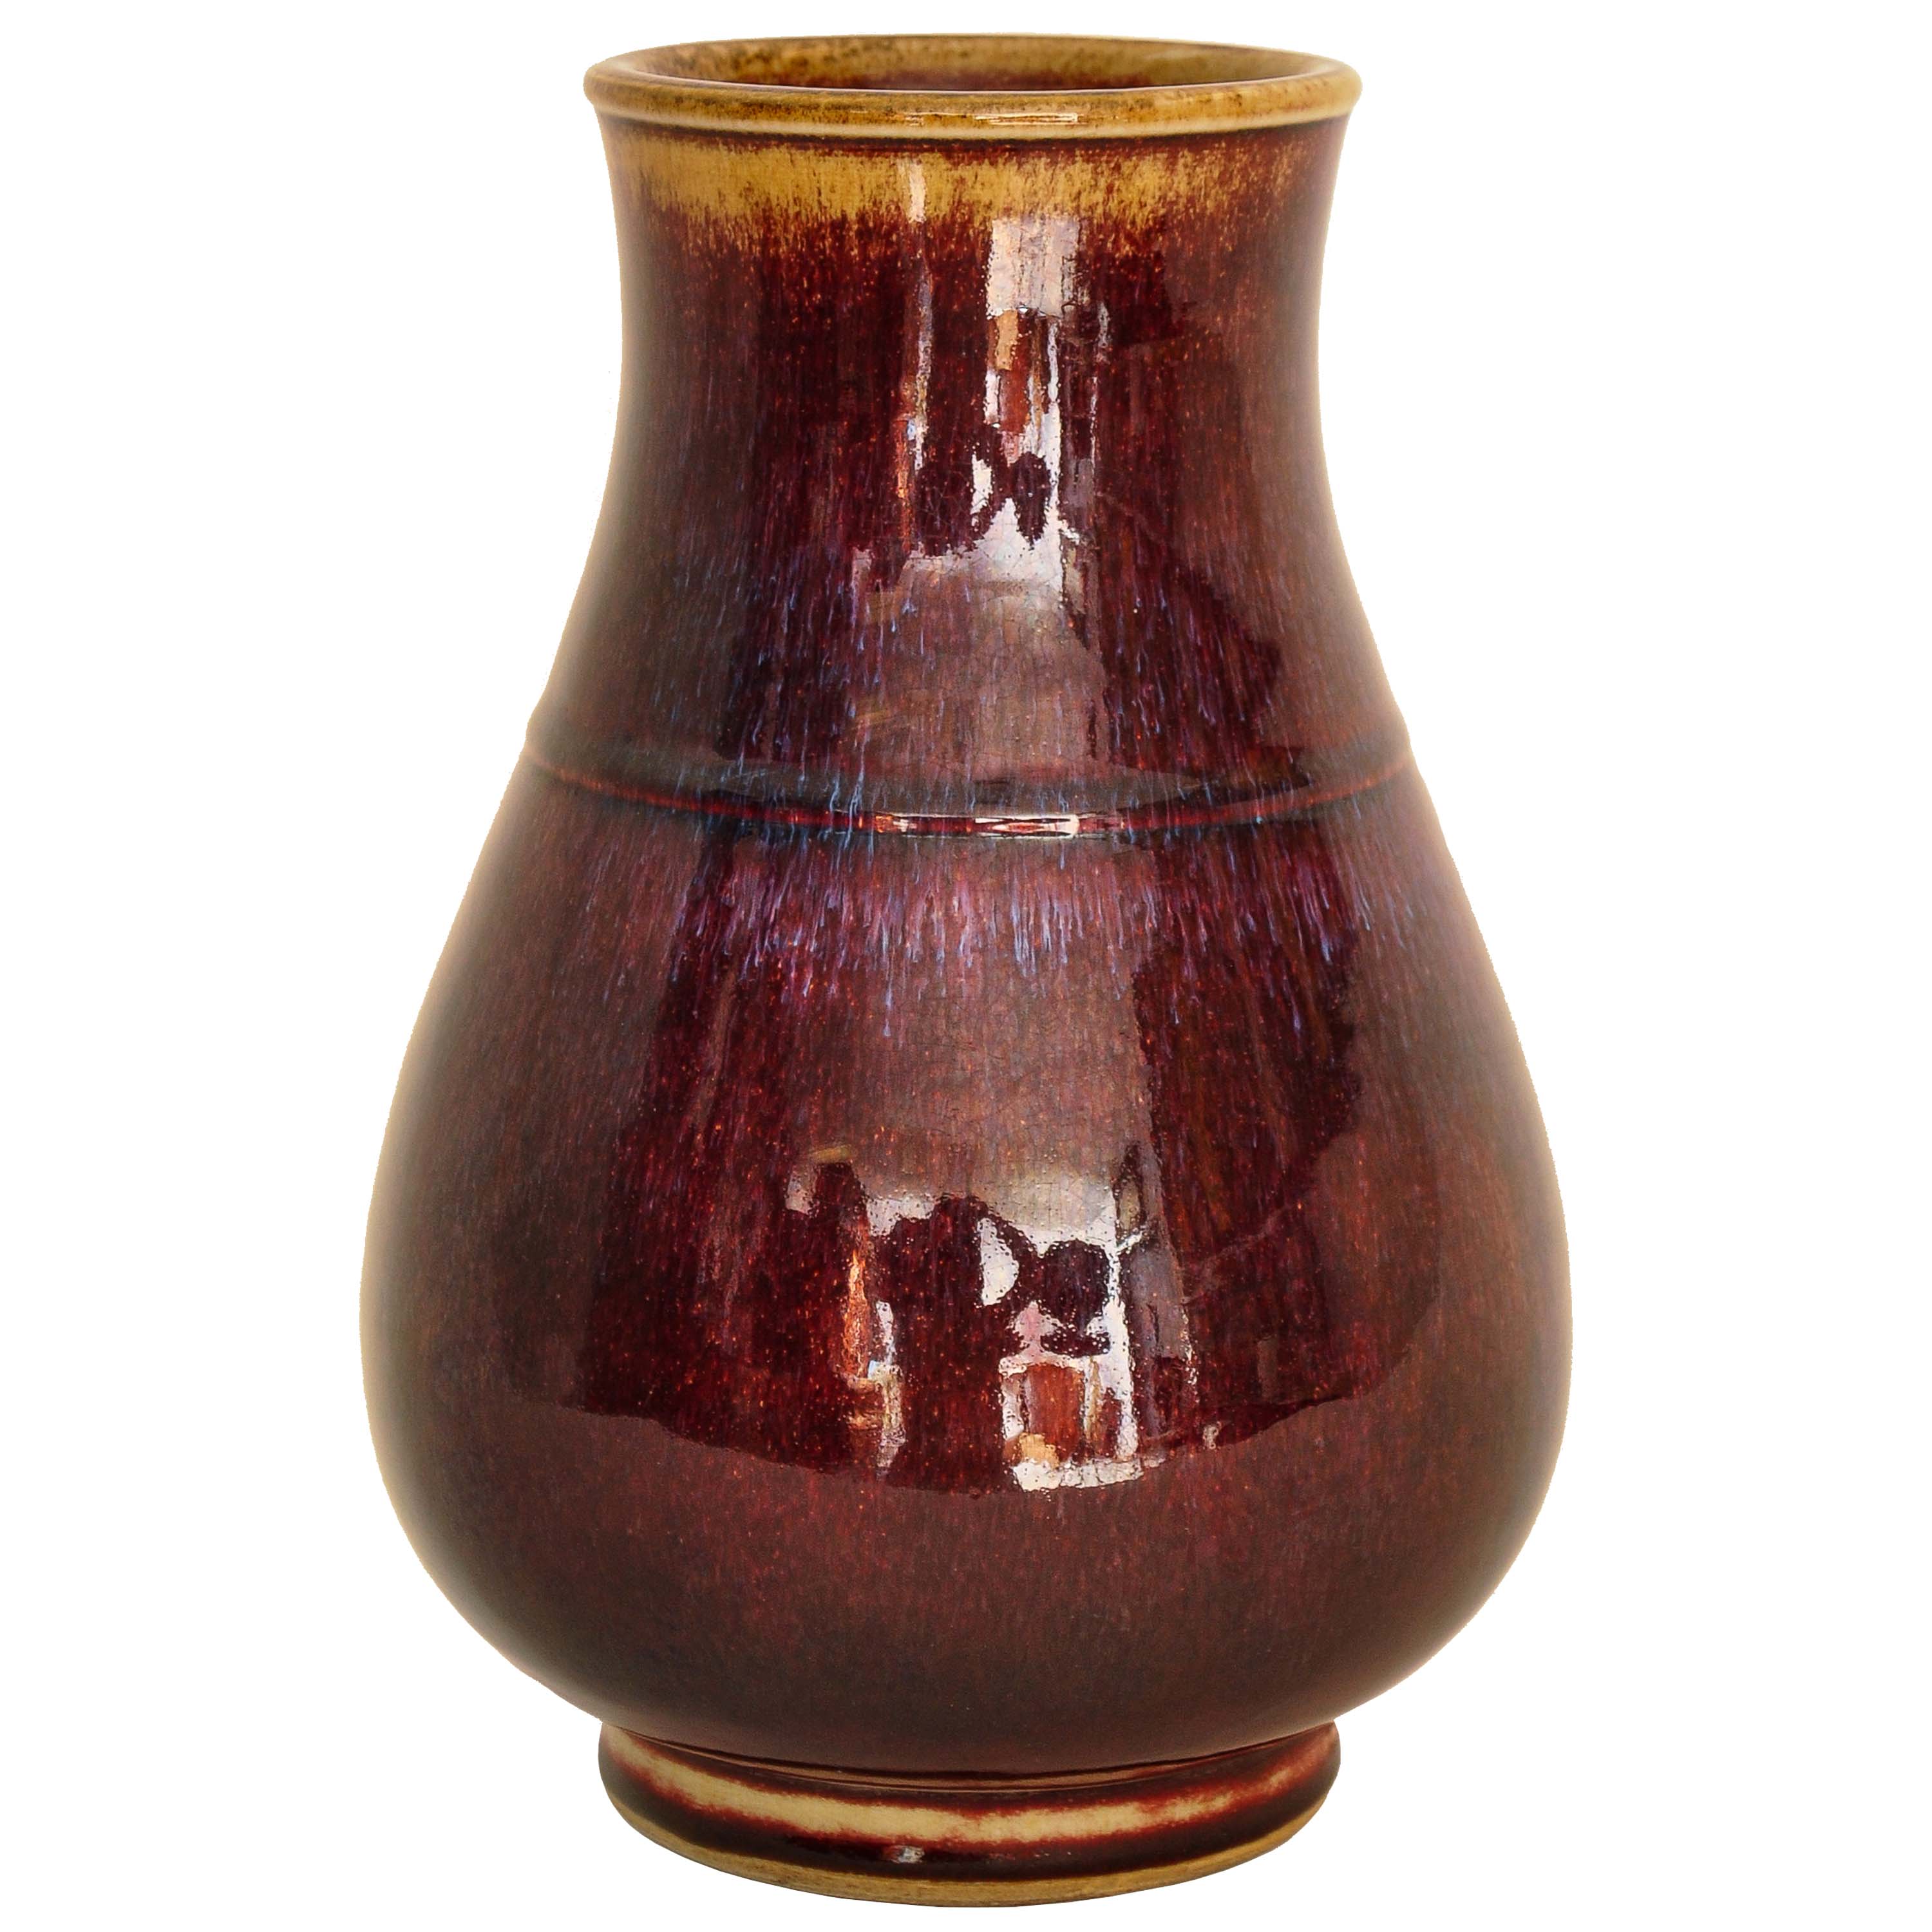 A good antique Chinese flambe-glazed Qing dynasty Hu shaped porcelain vase, circa 1850.
The Hu shaped vase having a reddy aubergine colored flambe-glazed body, the rim and foot having a lighter color with flashes of purple to the center of the